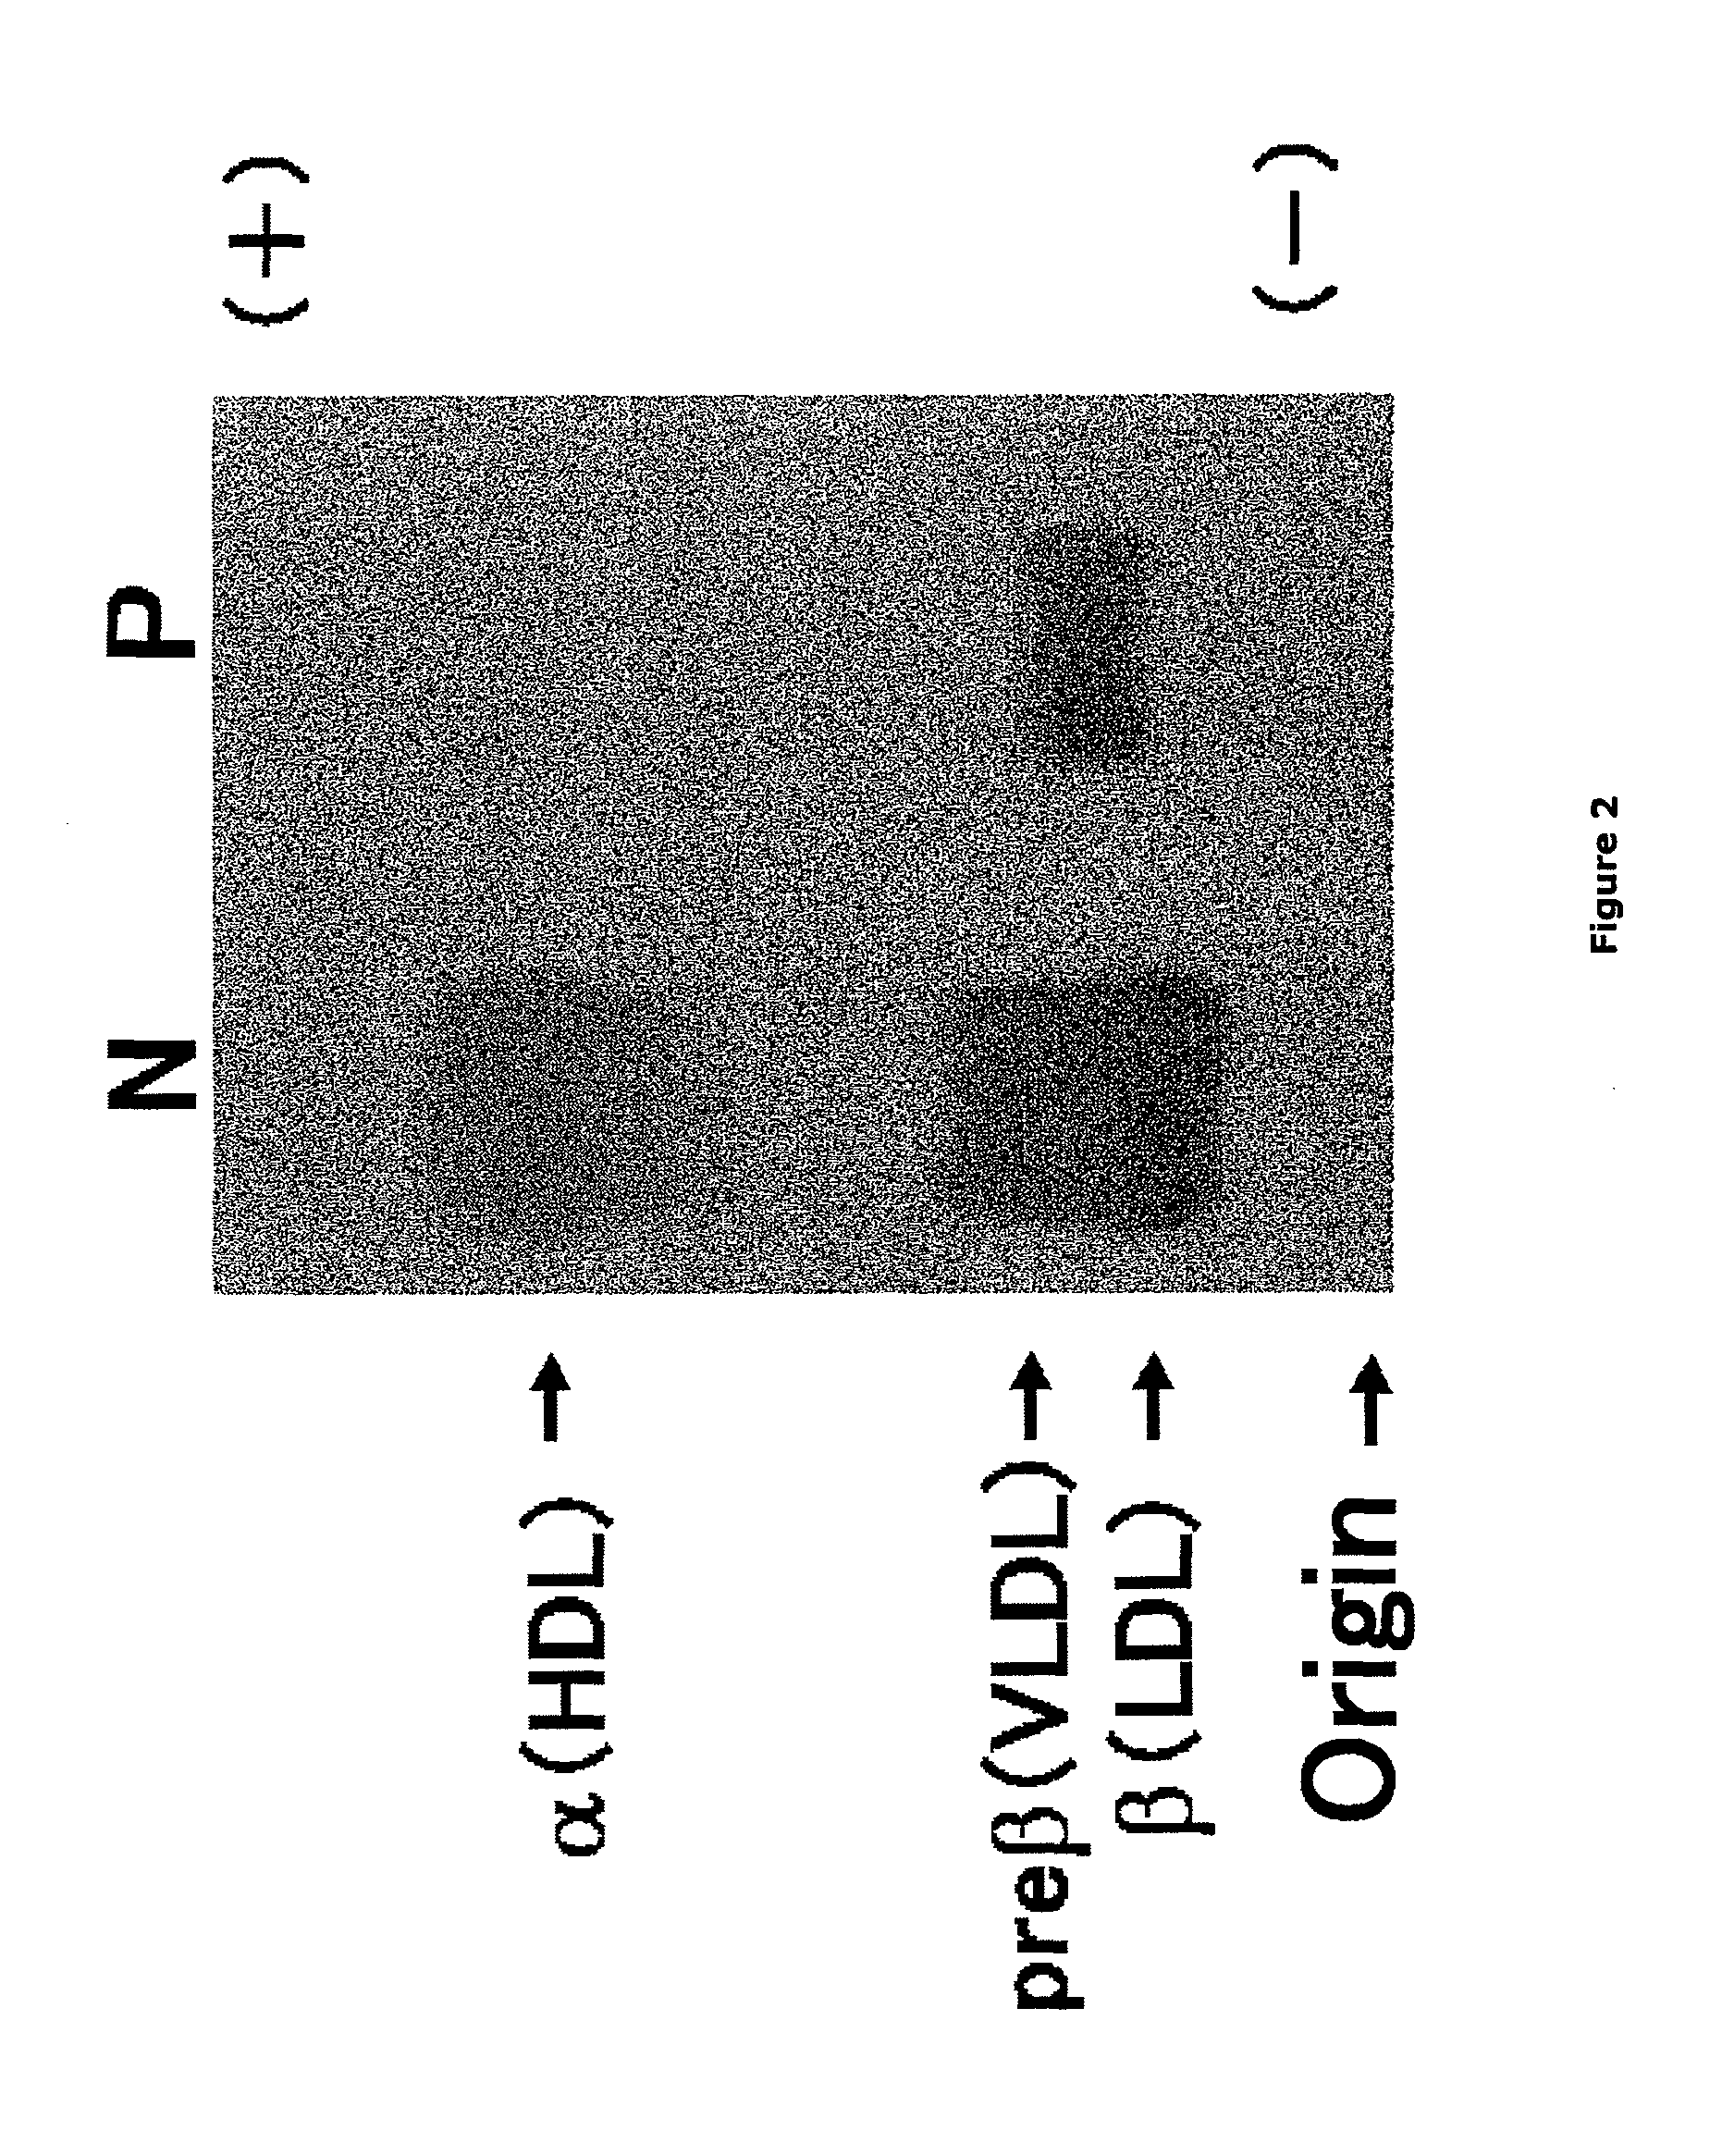 Monoclonal antibody against slightly oxidized low-density lipoprotein and hybridoma for producing the same